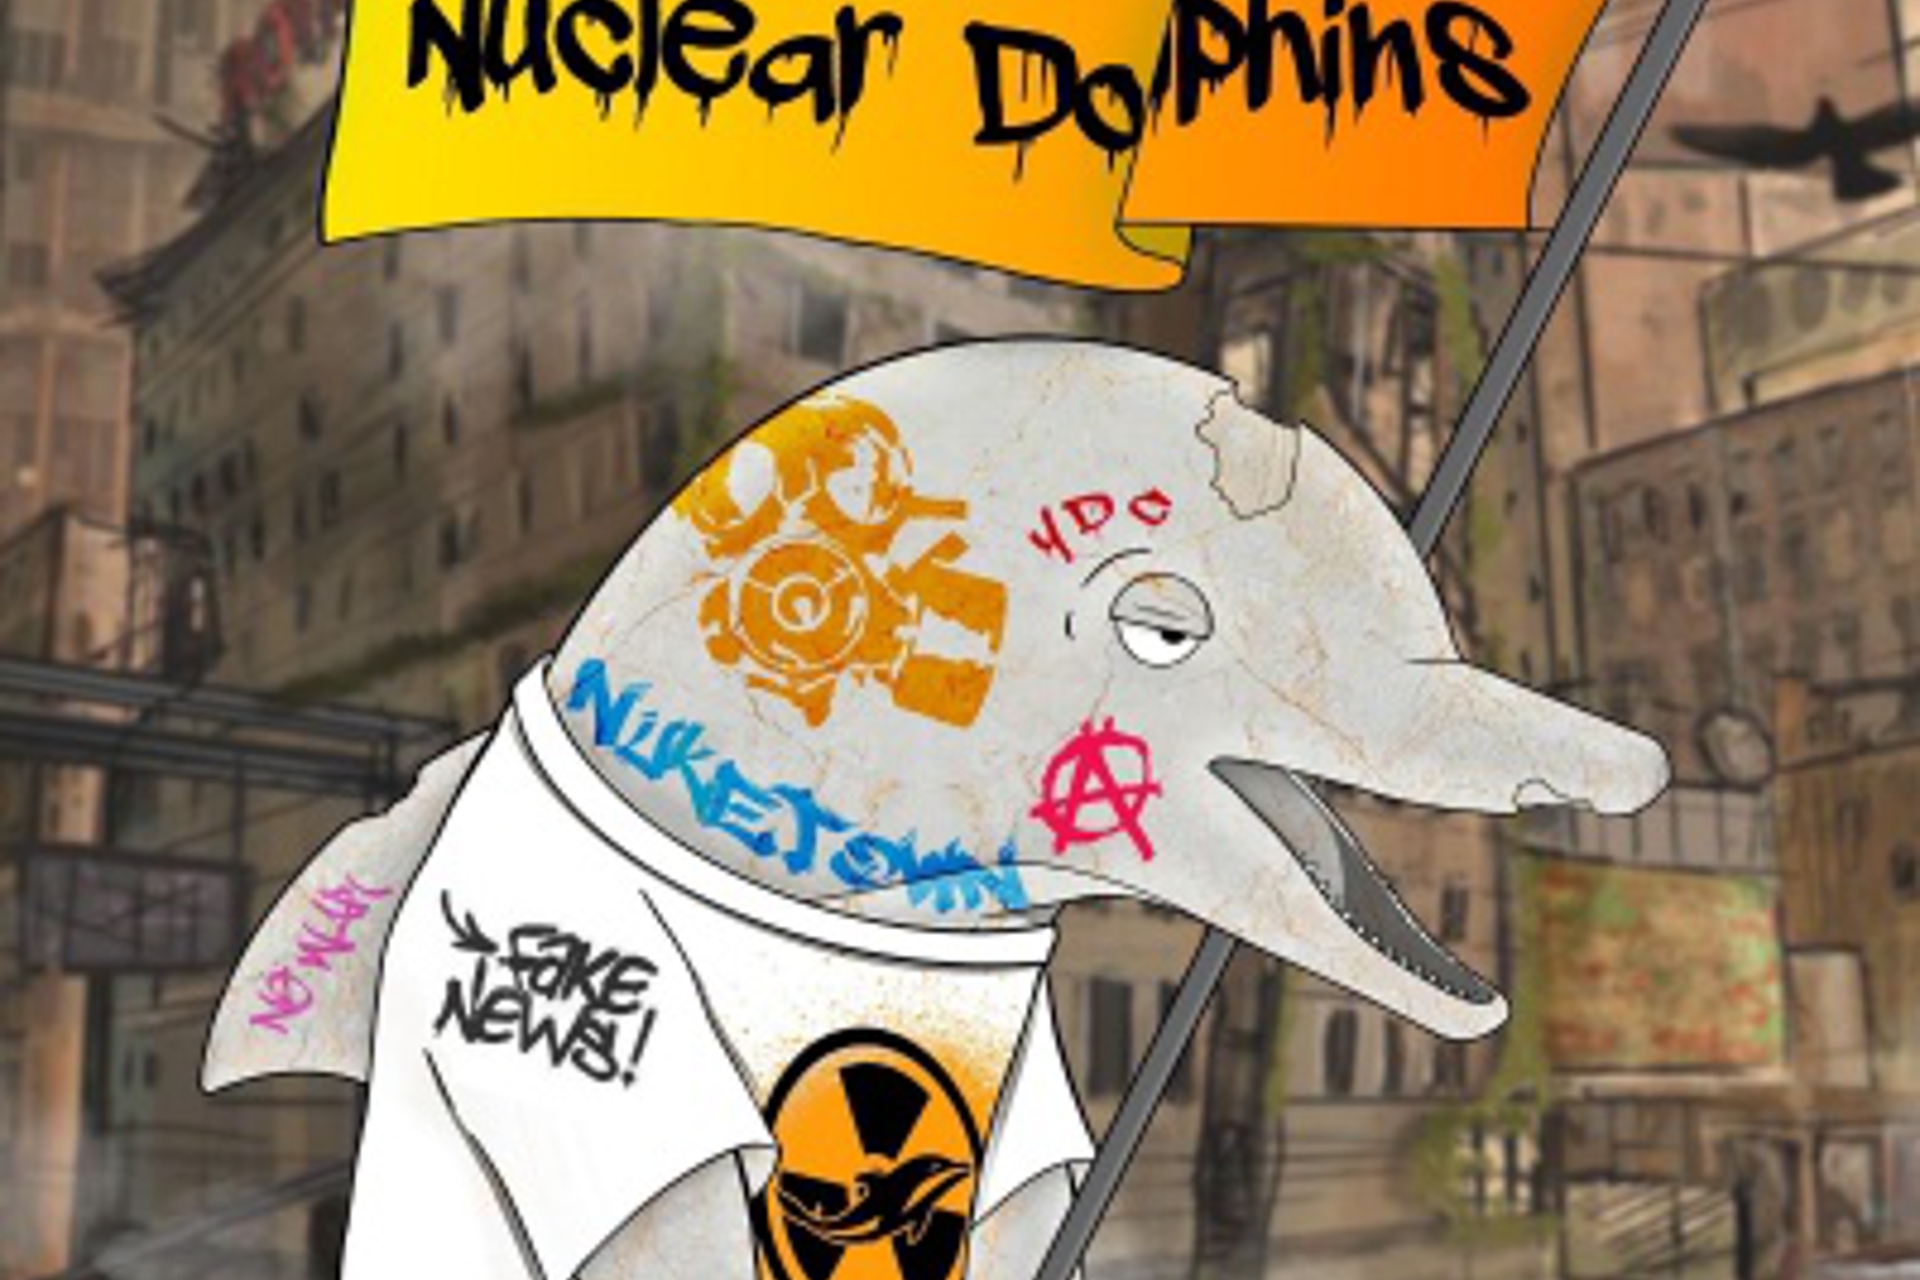 Nuclear Dolphins NFT